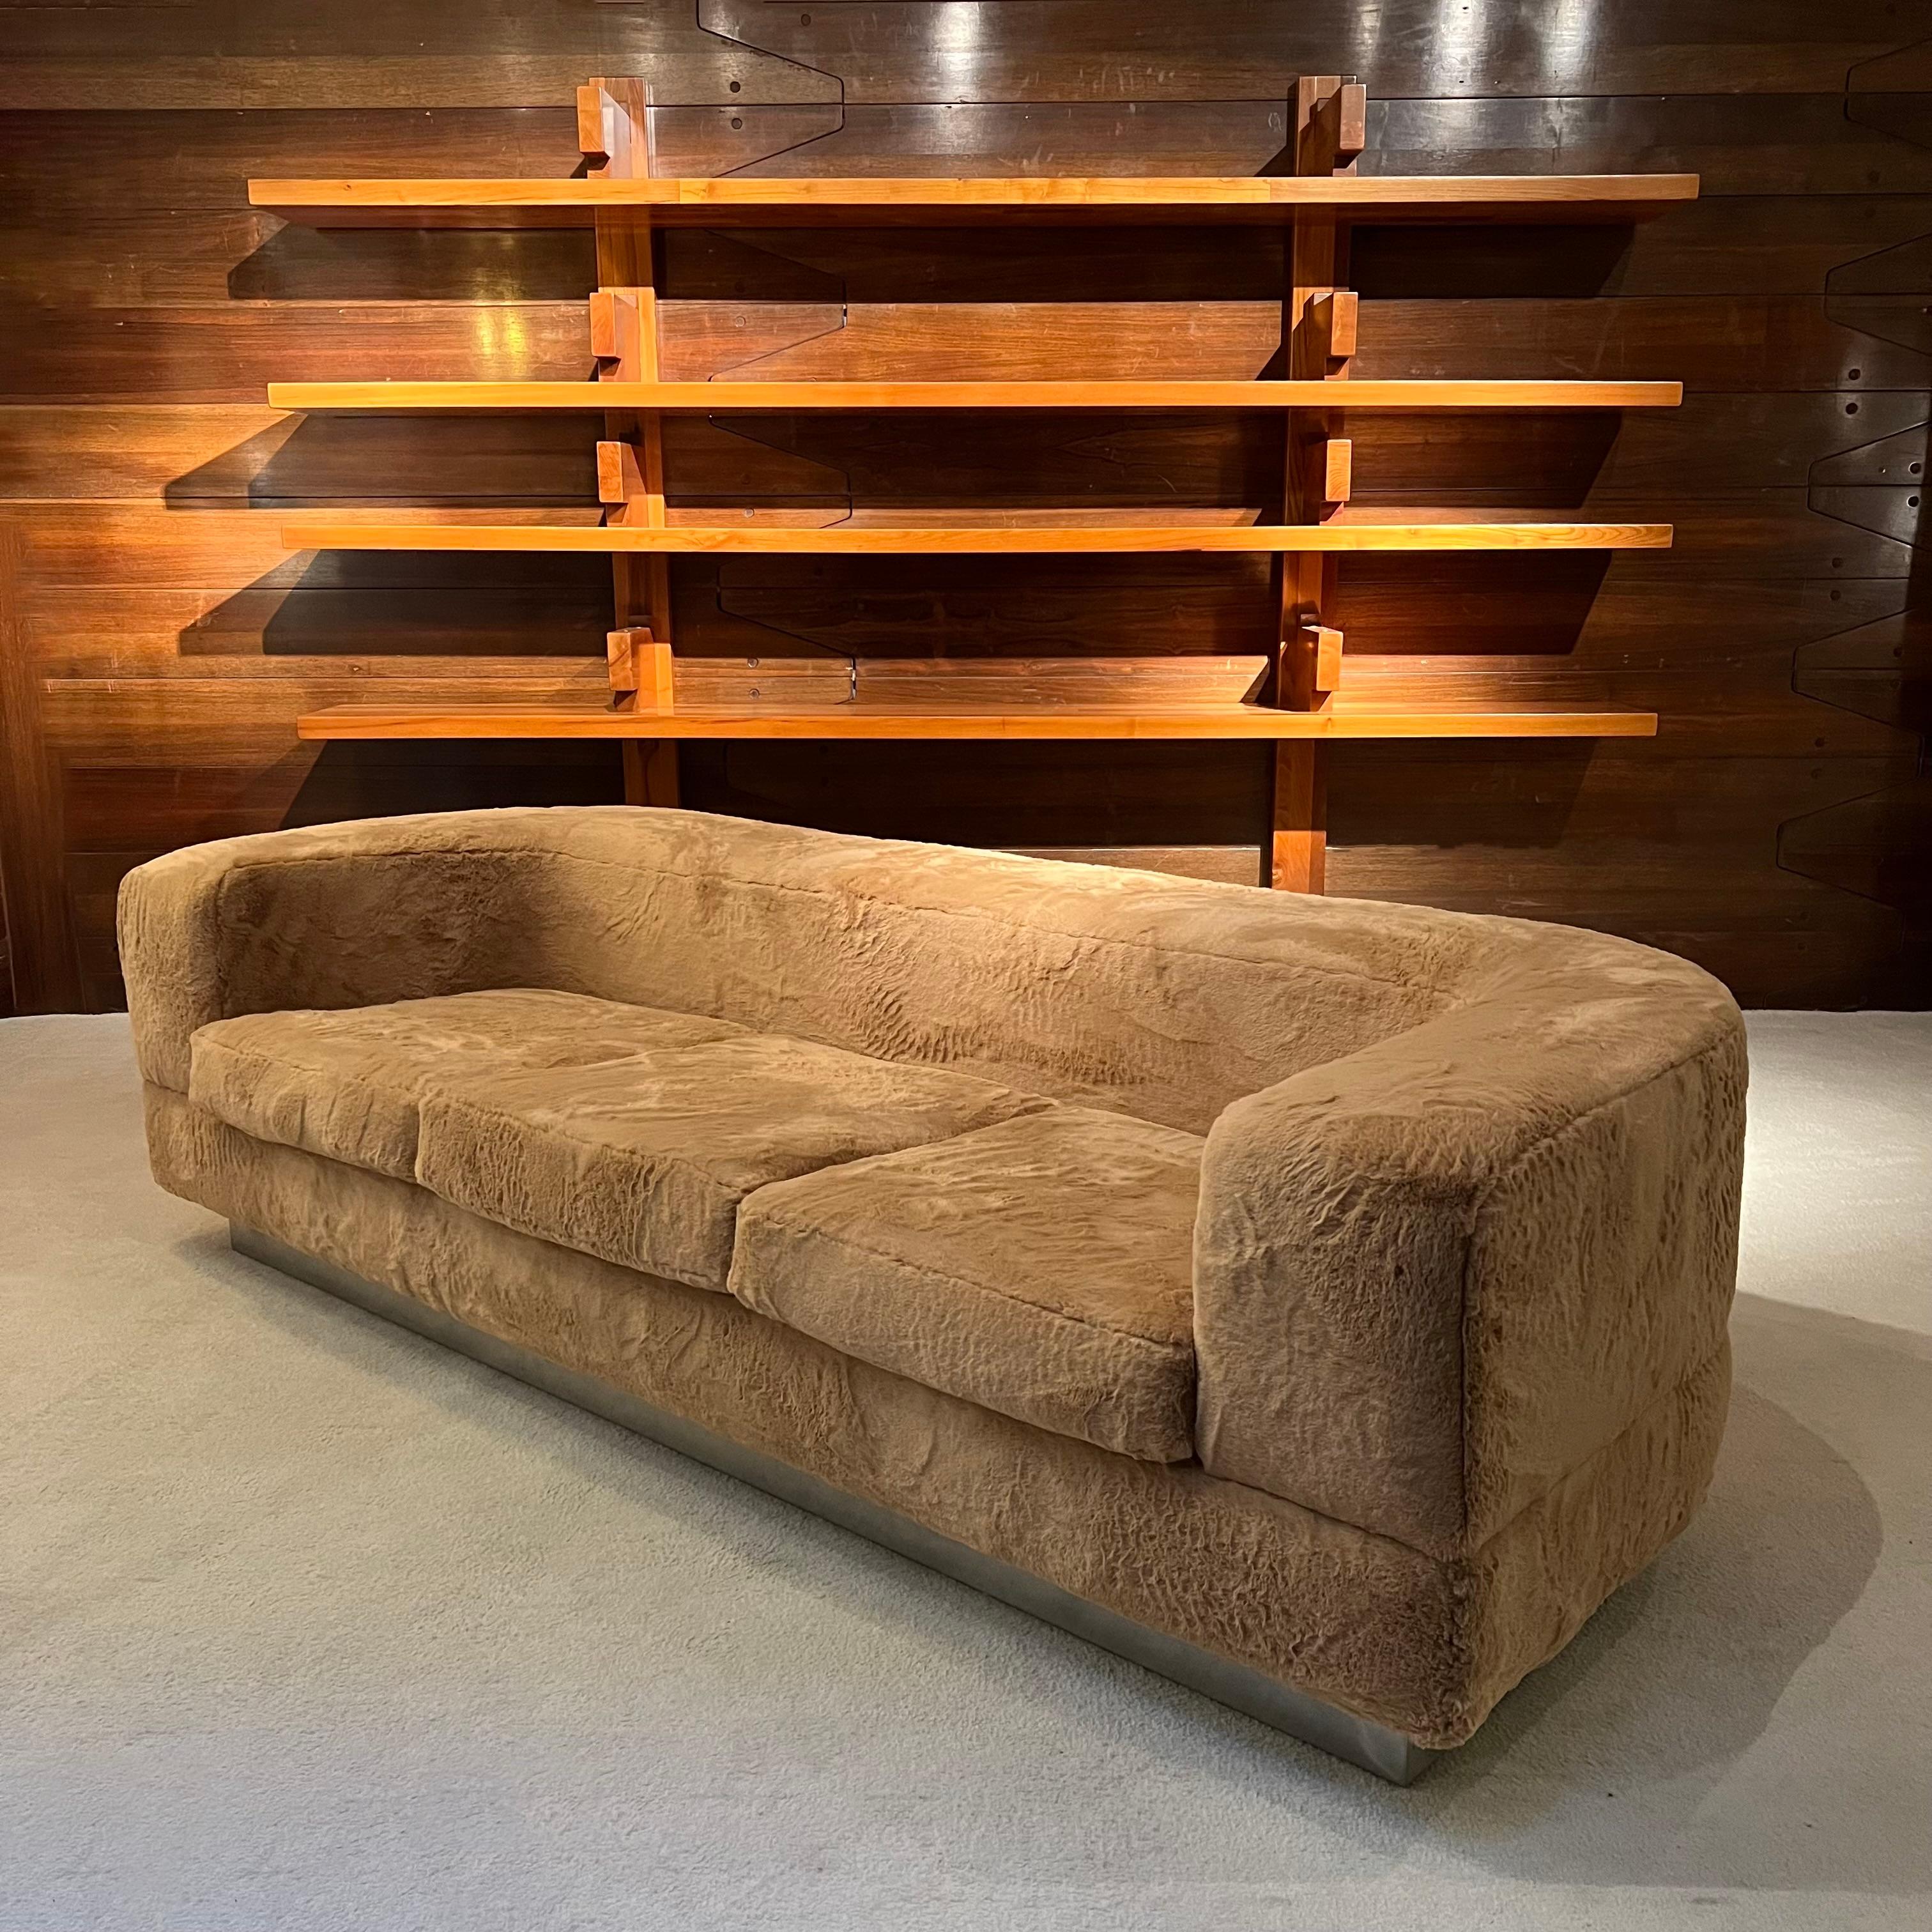 This iconic canape was designed by the French designer Jacques Charpentier, in France in the 70s.
The canape has been entirely reupholstered in faux fur. The base is a stainless steel plinth. 
Its classic shape makes it a model that can easily be